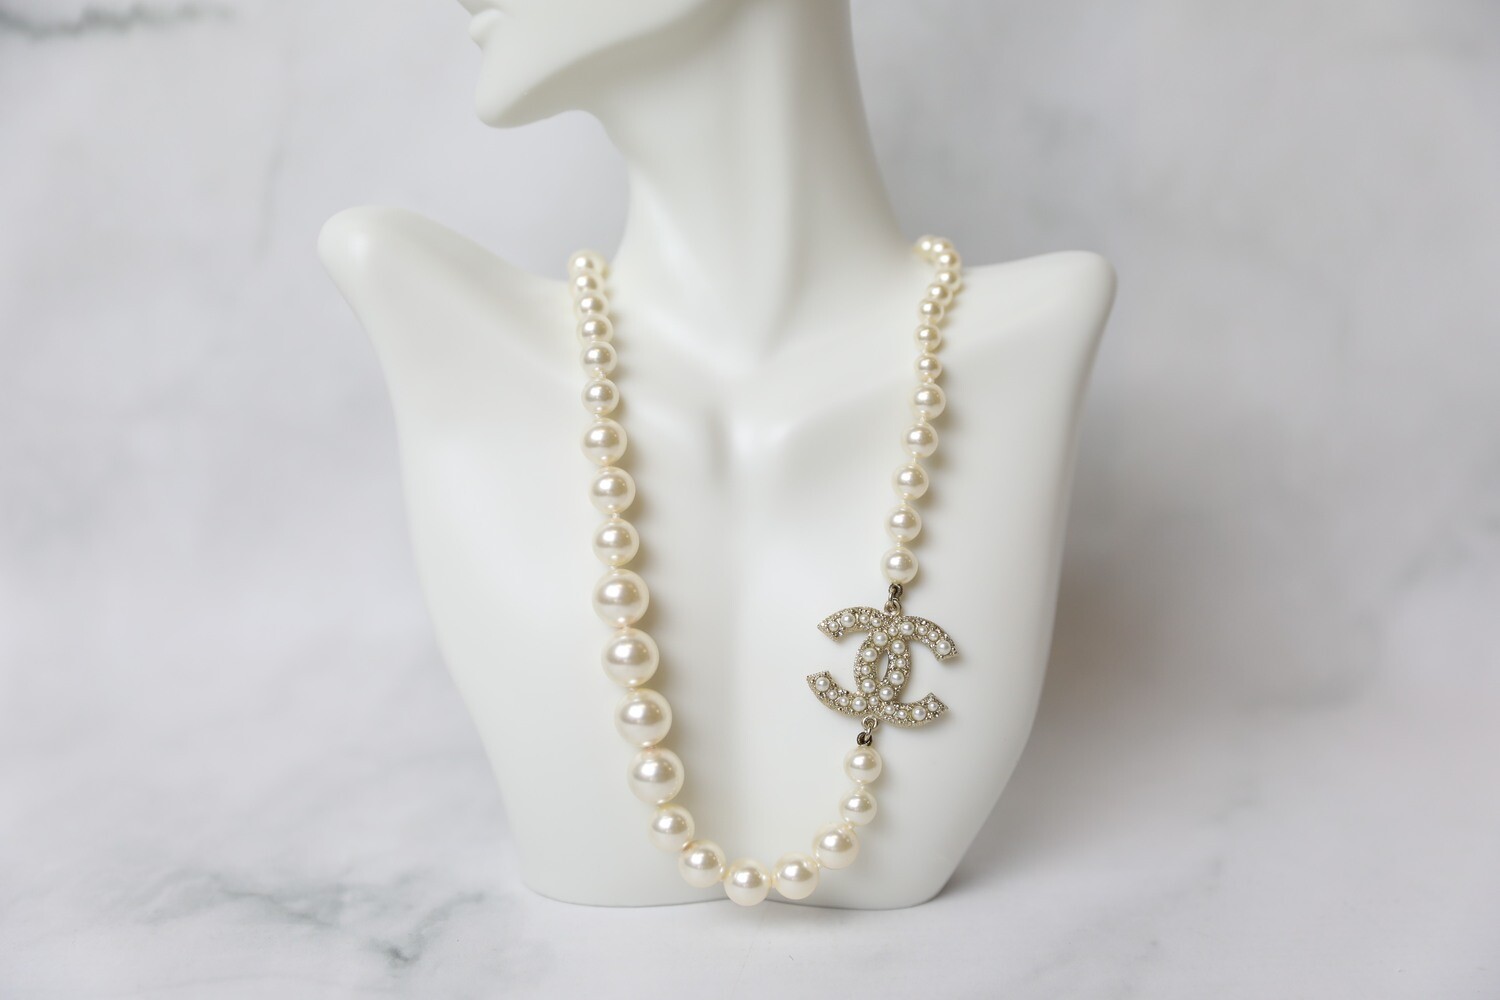 Chanel Necklace Pearls with Crystal CC, New in Box GA001 MA001